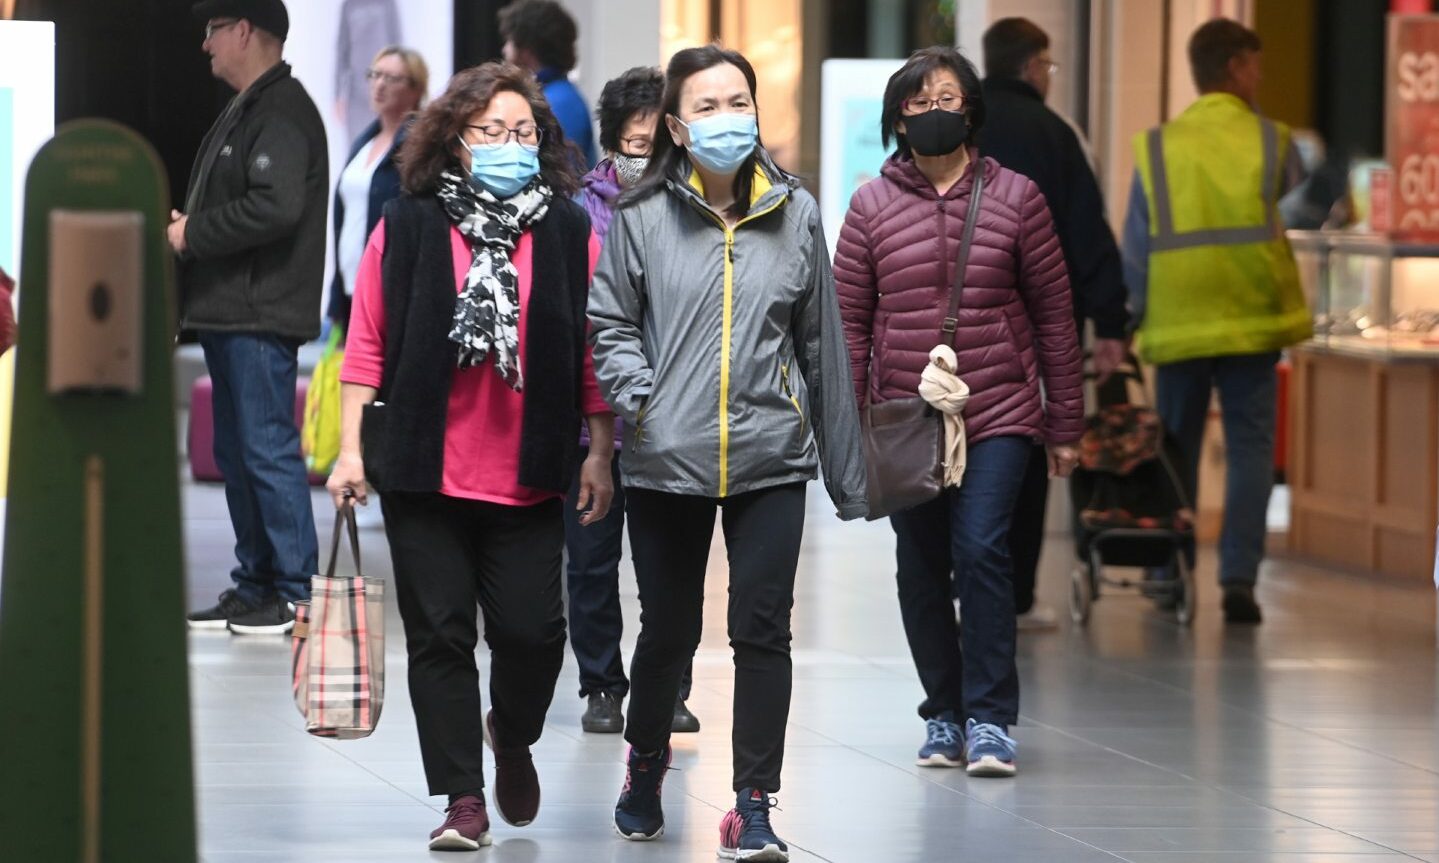 Some shoppers in Aberdeen have continued to wear face masks. Photo: Chris Sumner/DCT Media